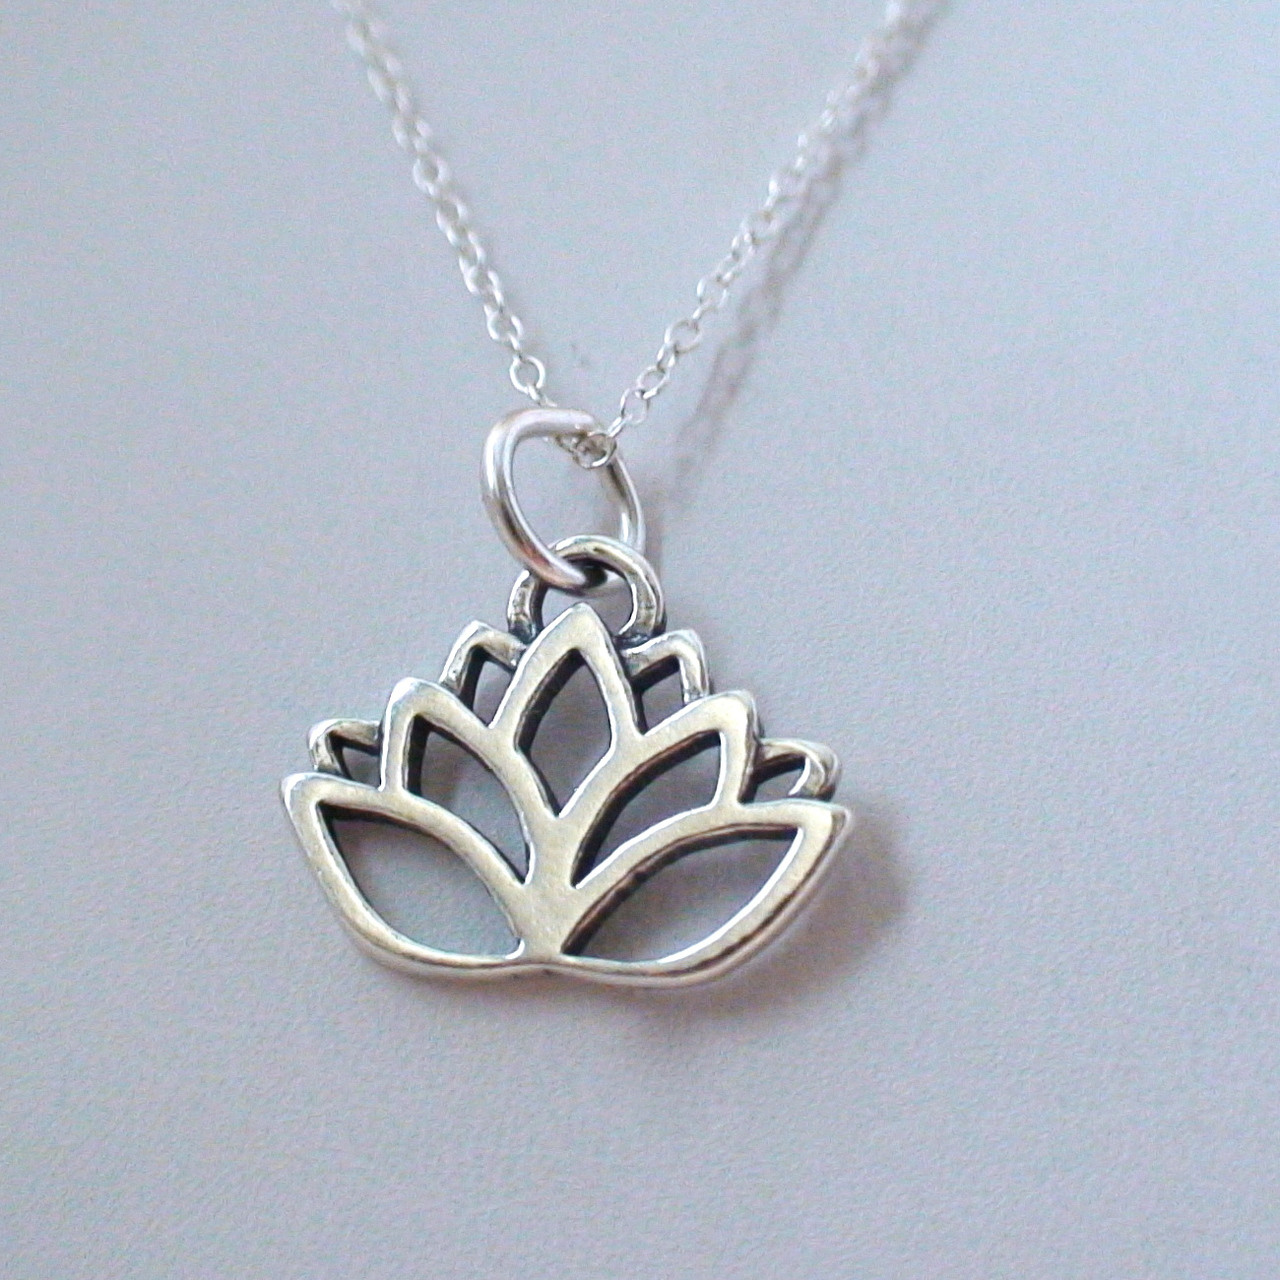 Lotus Flower Necklace in 925 Sterling Silver | FashionJunkie4Life